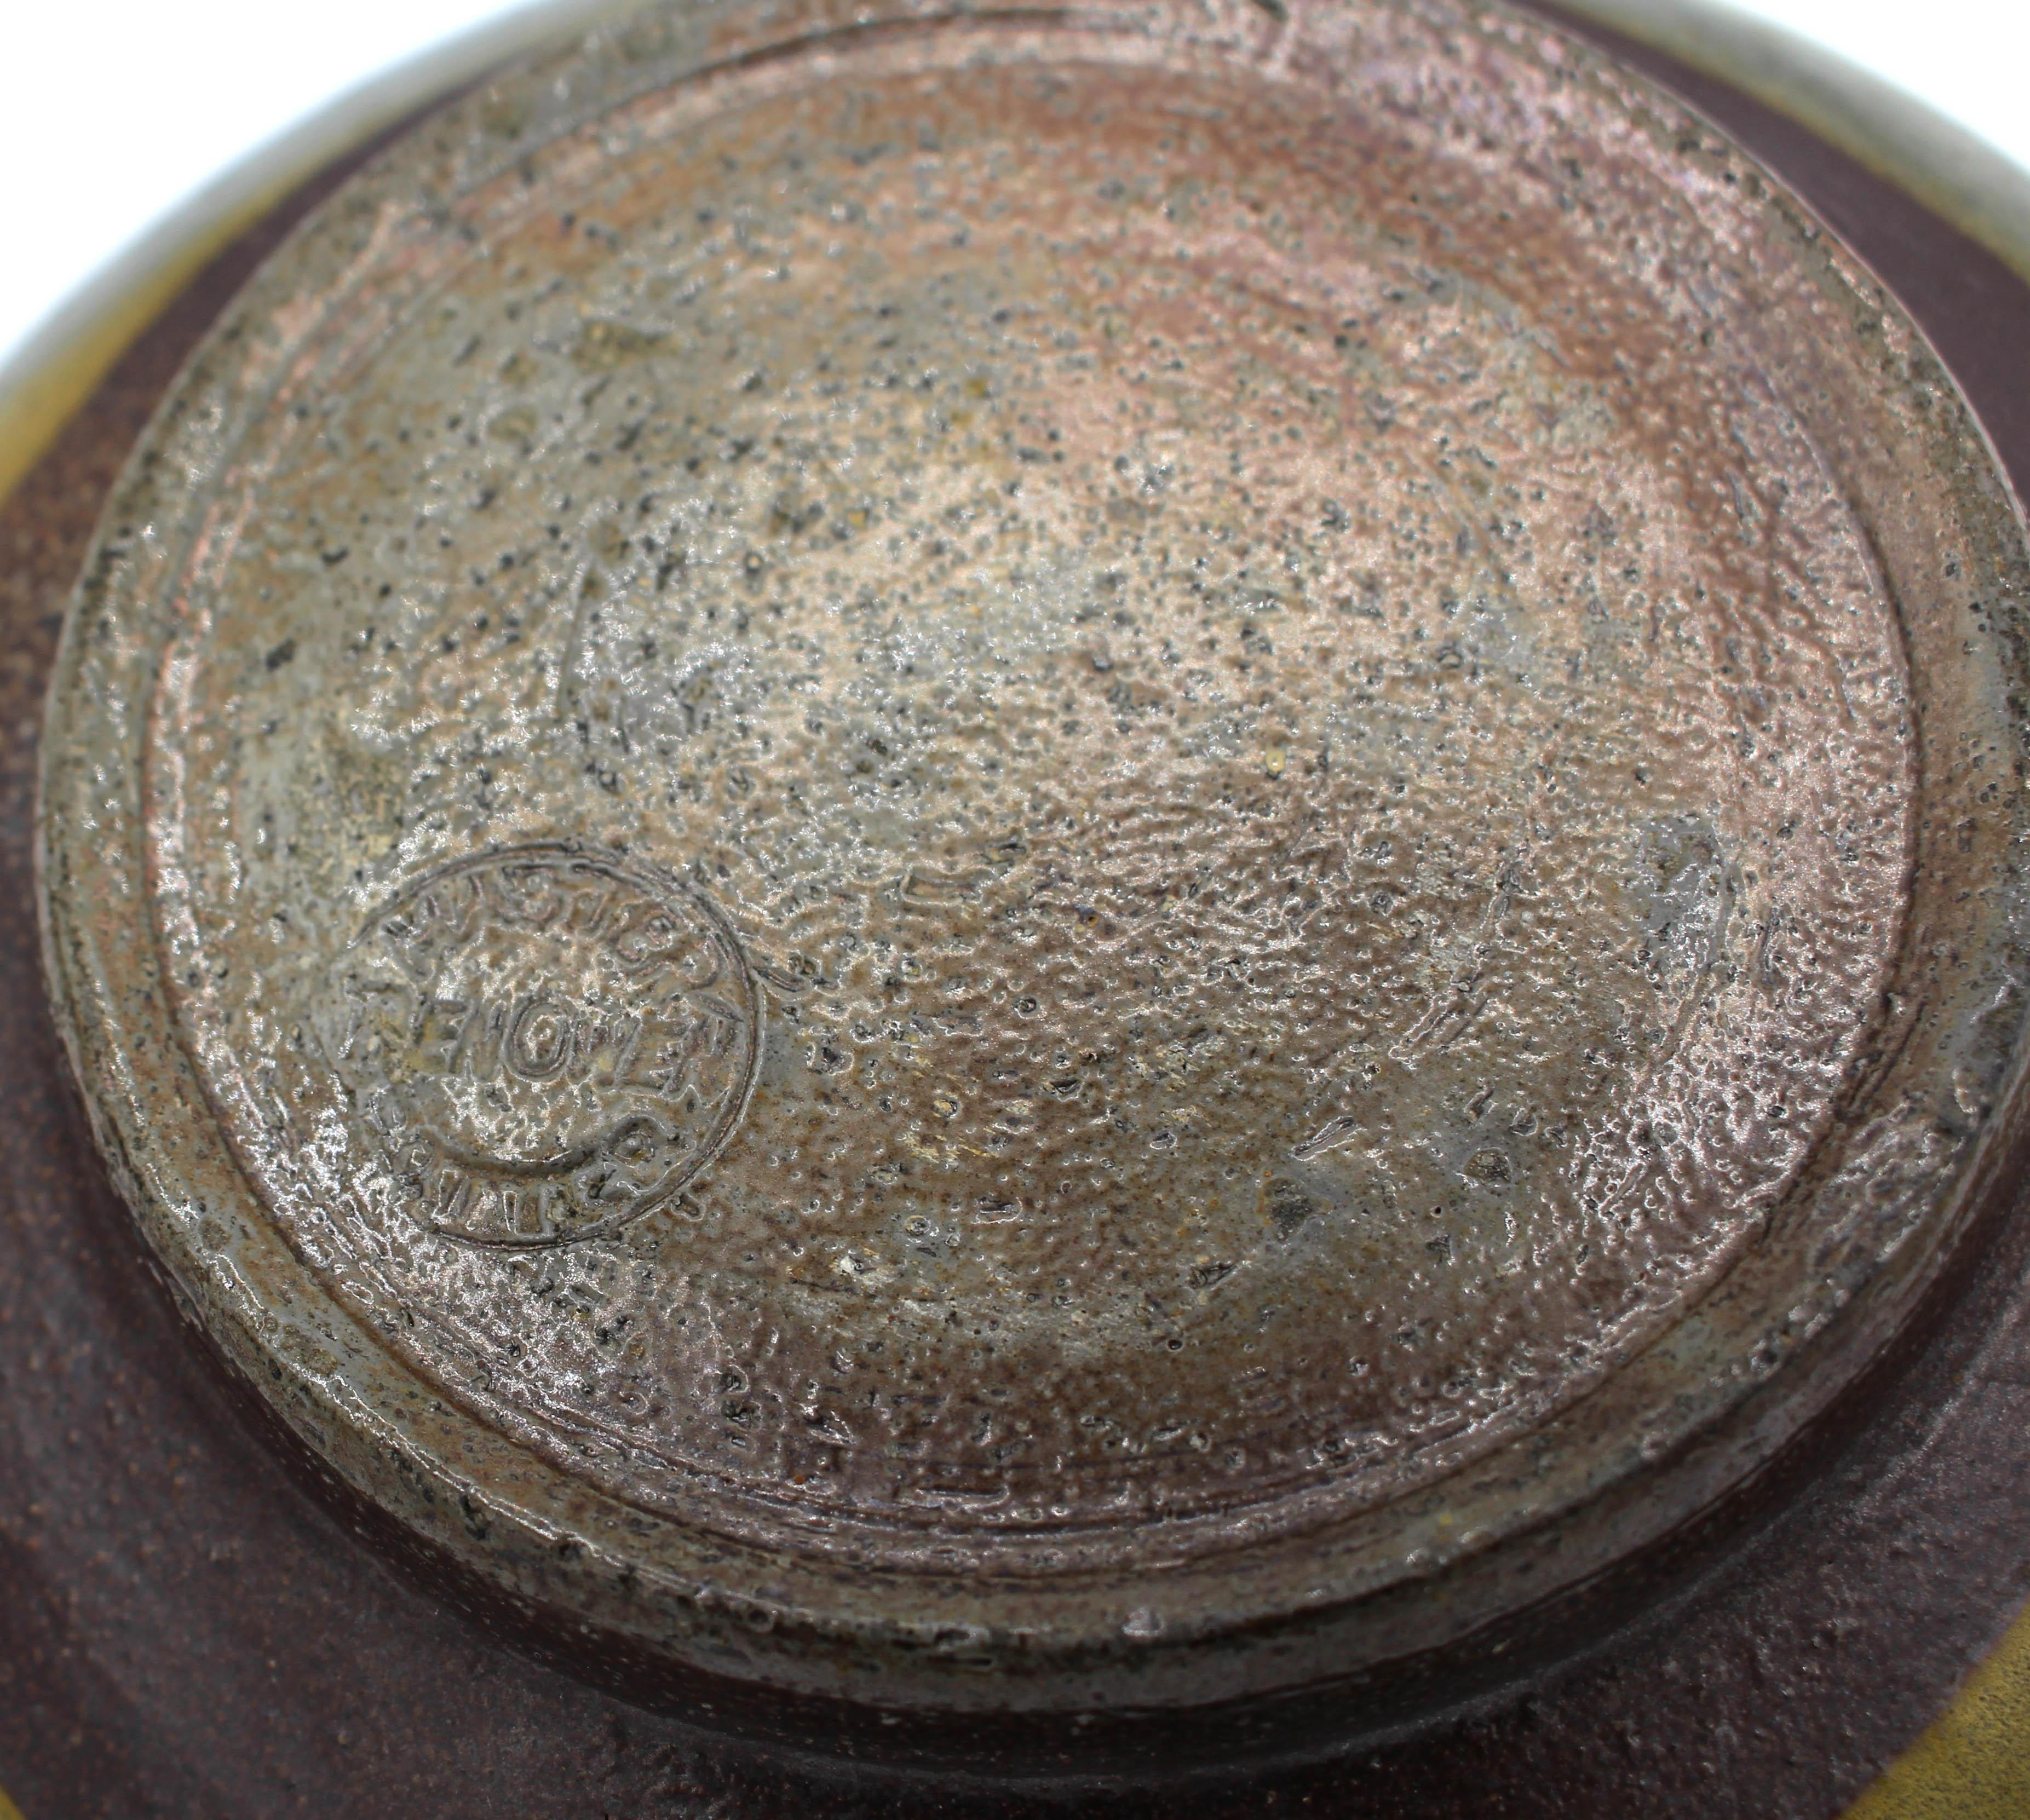 1960-1972 Frogskin Glaze Pottery Bowl by Ben Owen I In Good Condition For Sale In Chapel Hill, NC